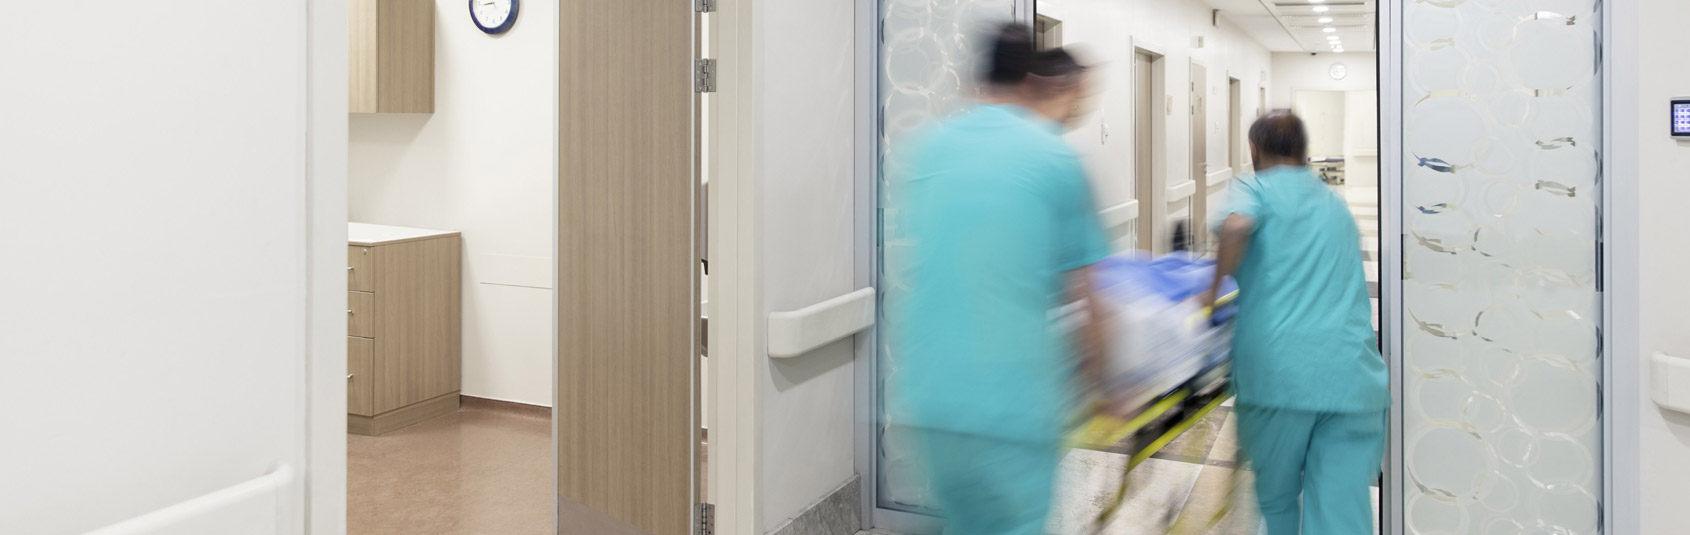 Common Reasons Why People Visit an Emergency Room